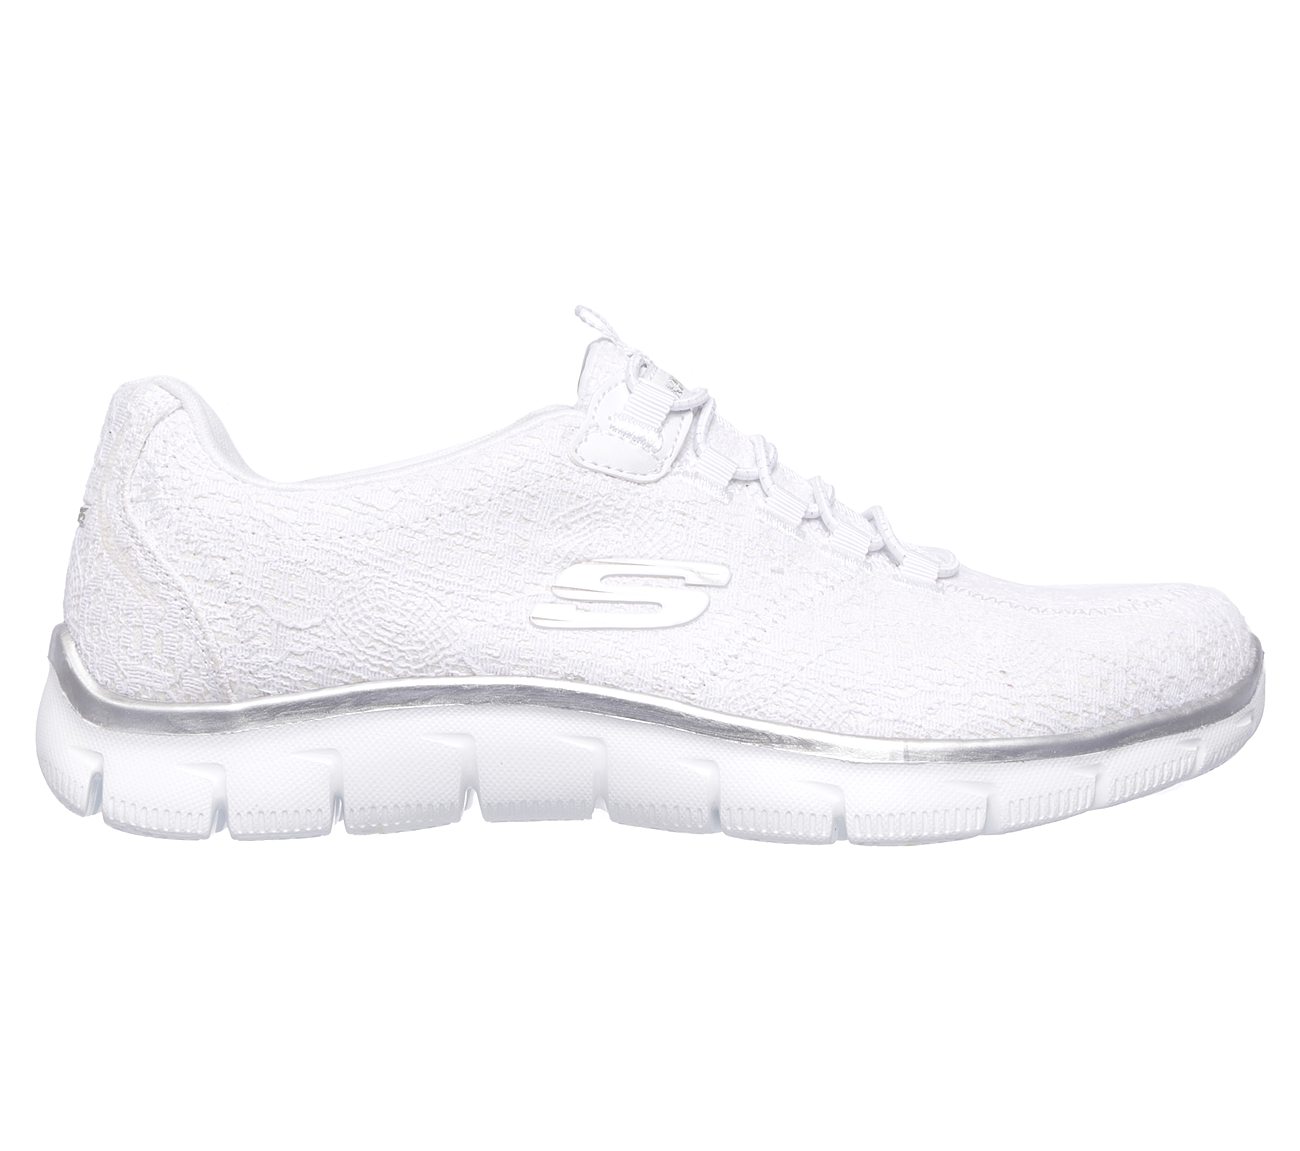 Spring Glow SKECHERS Relaxed Fit Shoes